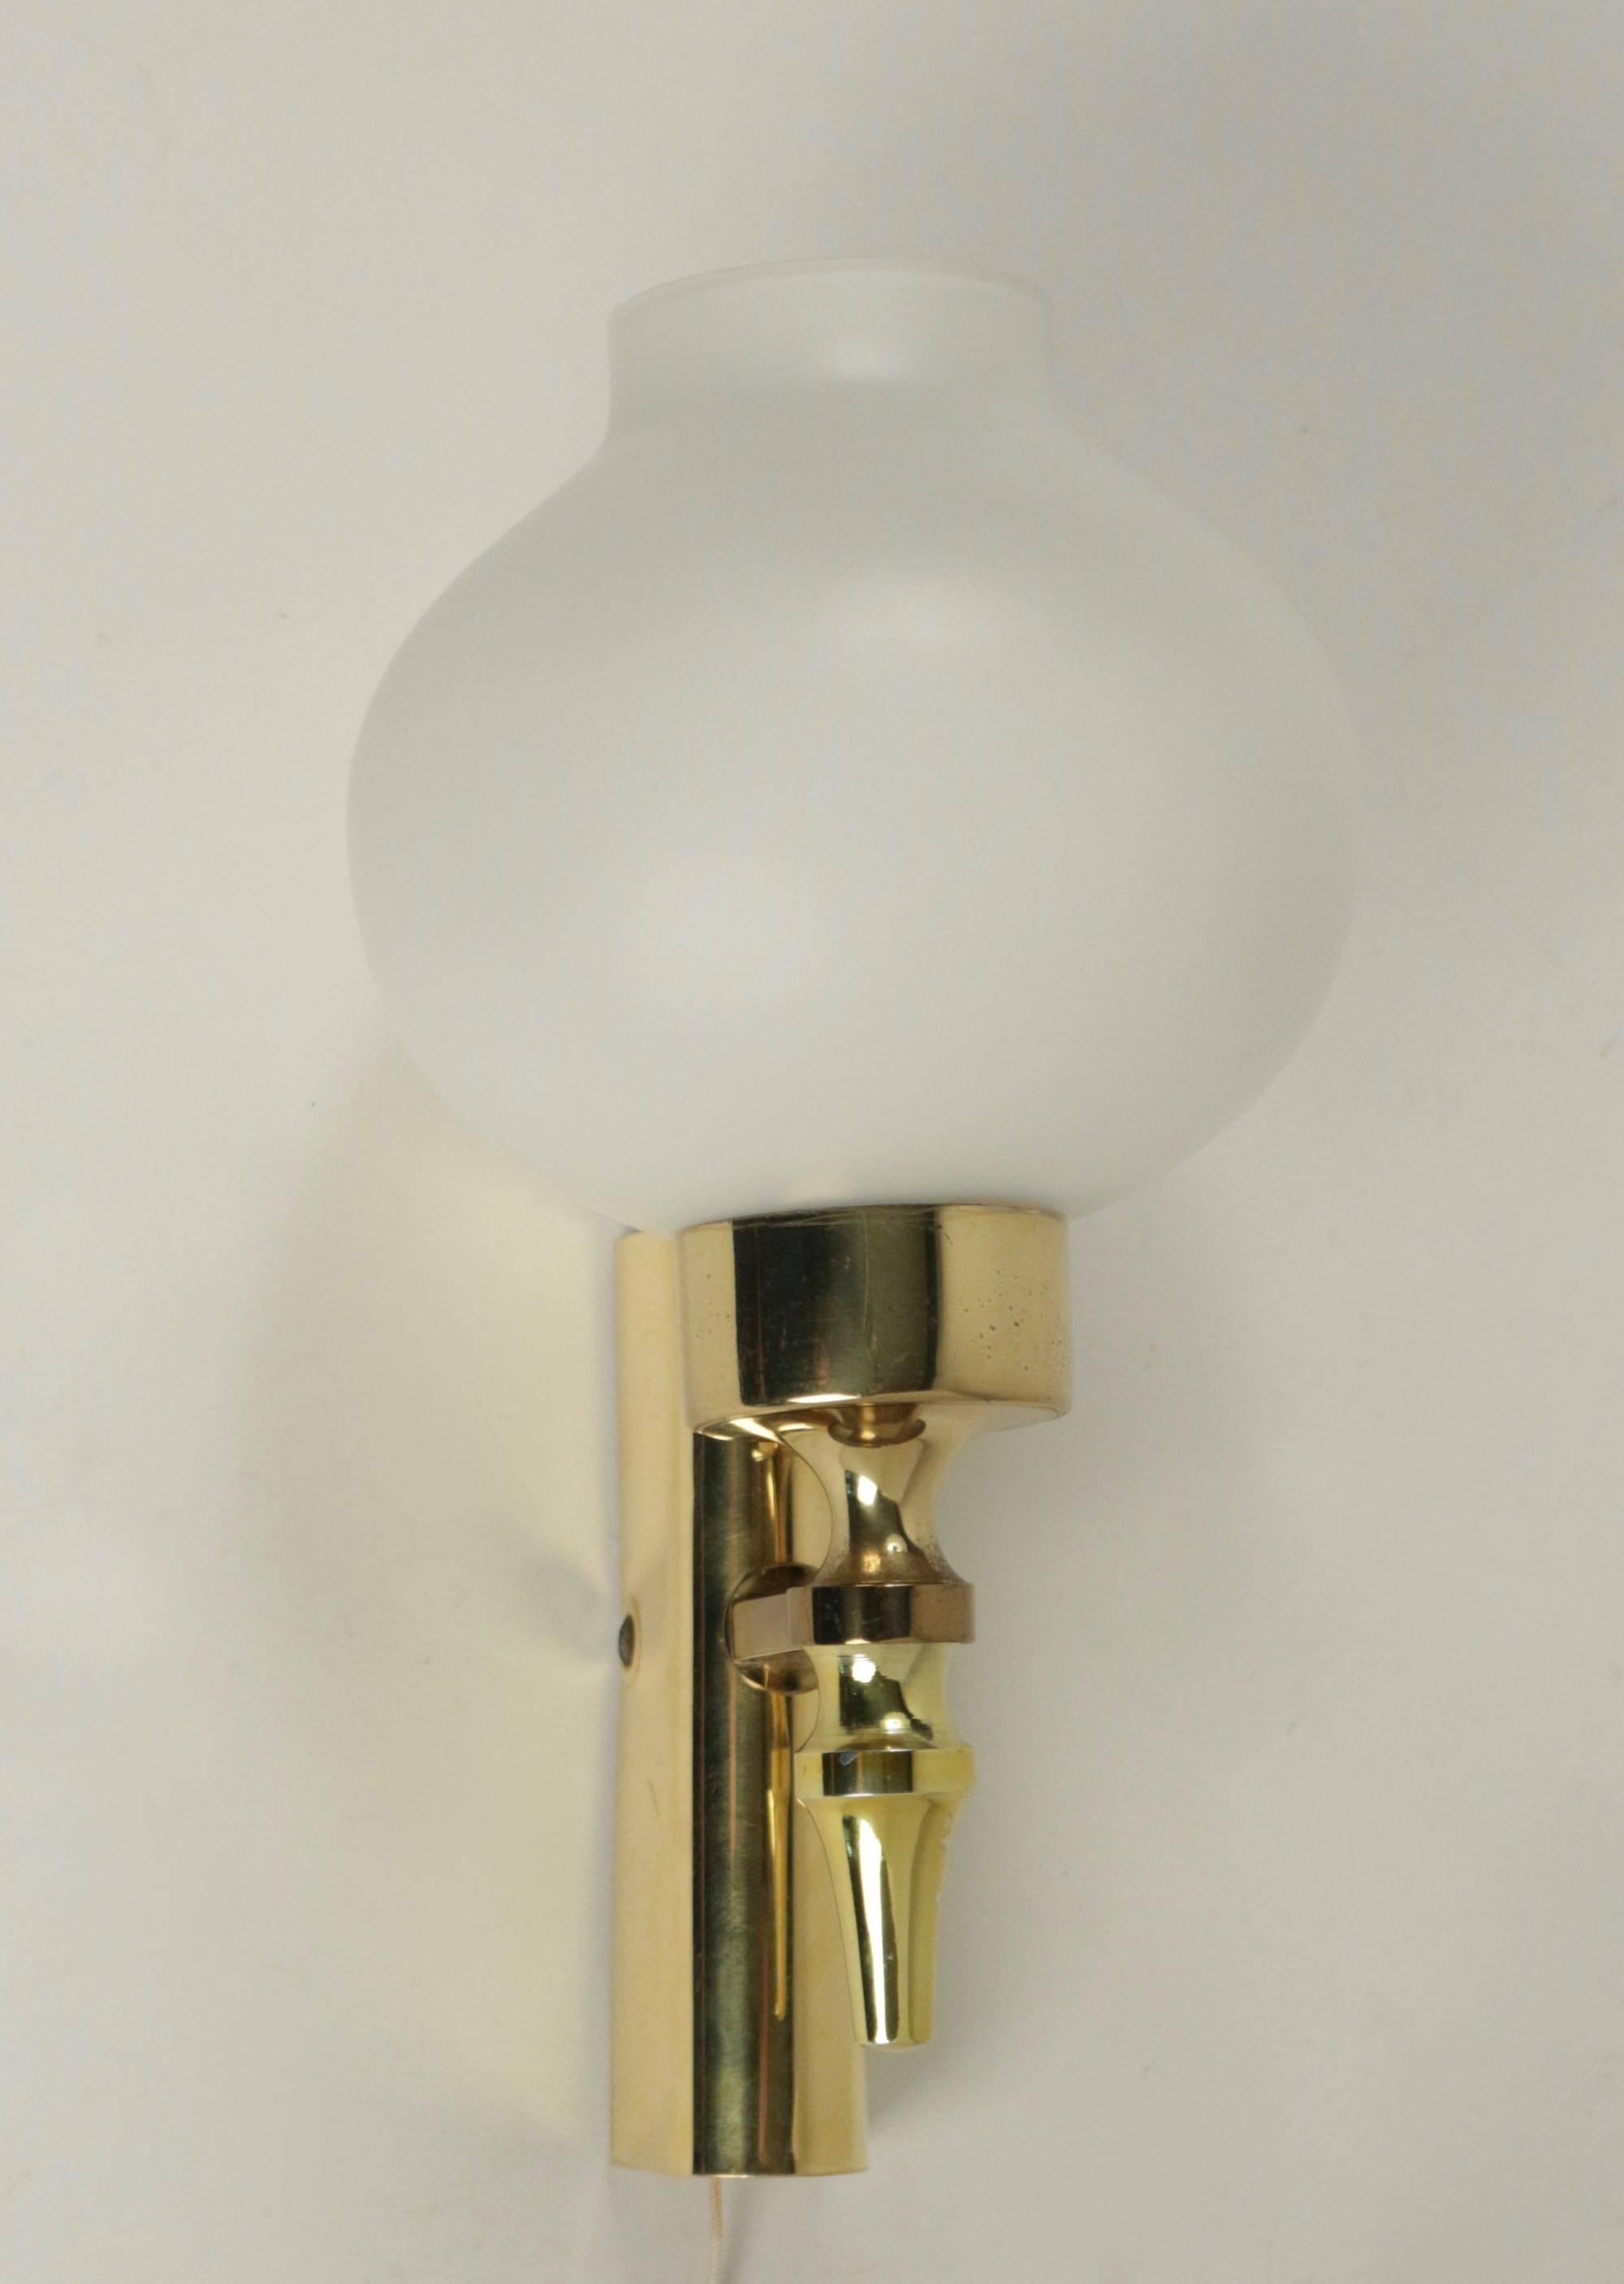 1960s, pair of sconces attributed to Stilnovo.

The sconces are made of brass, the central stem is crafted as a turned wood piece and supports round white satin glass lampshade.

One bulb per sconce.
 